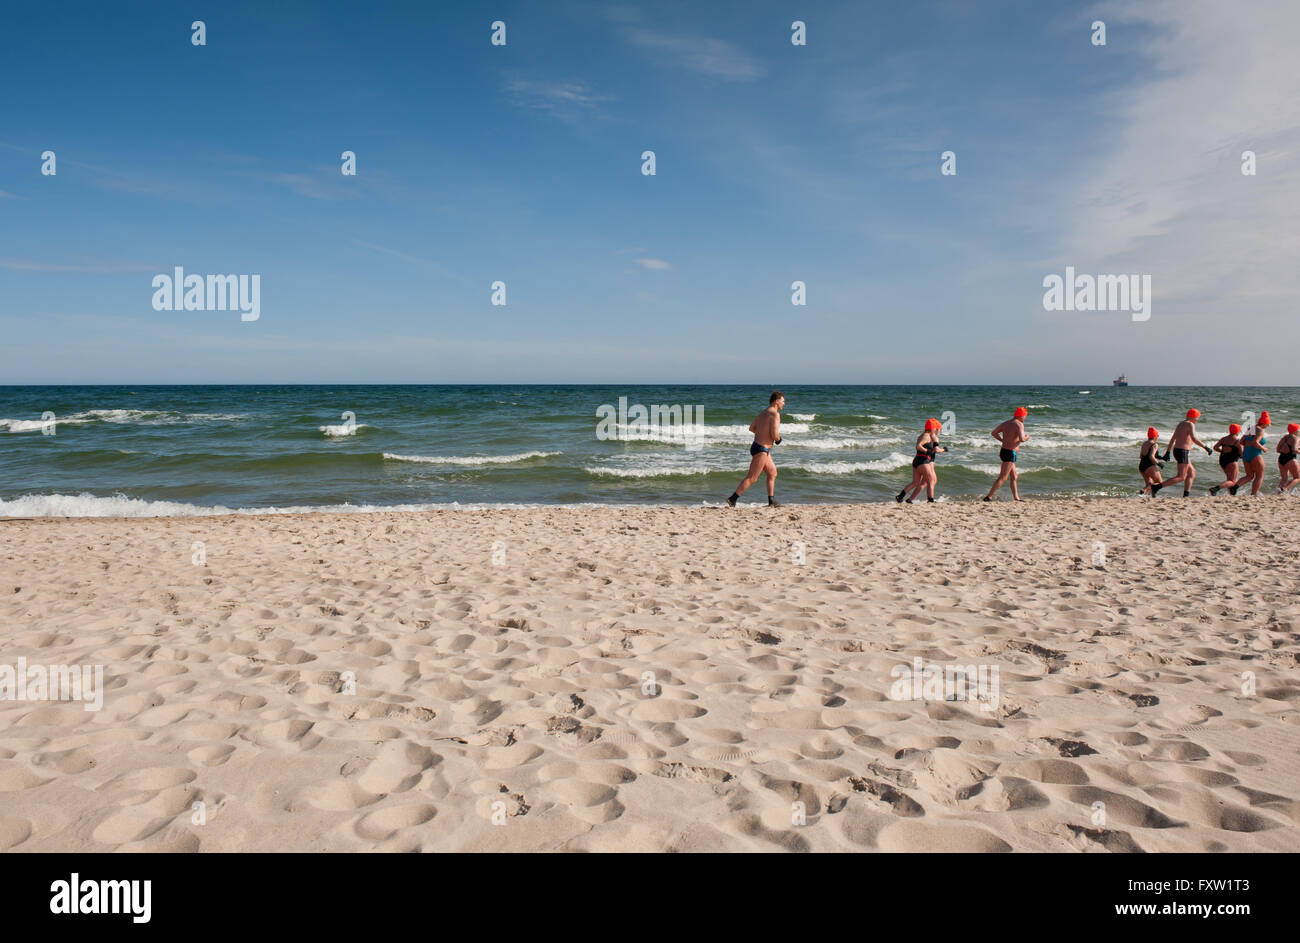 Winter swimmers warm up running along the beach in Wladyslawowo seashore, Poland, Europe, people during active sport in sea Stock Photo